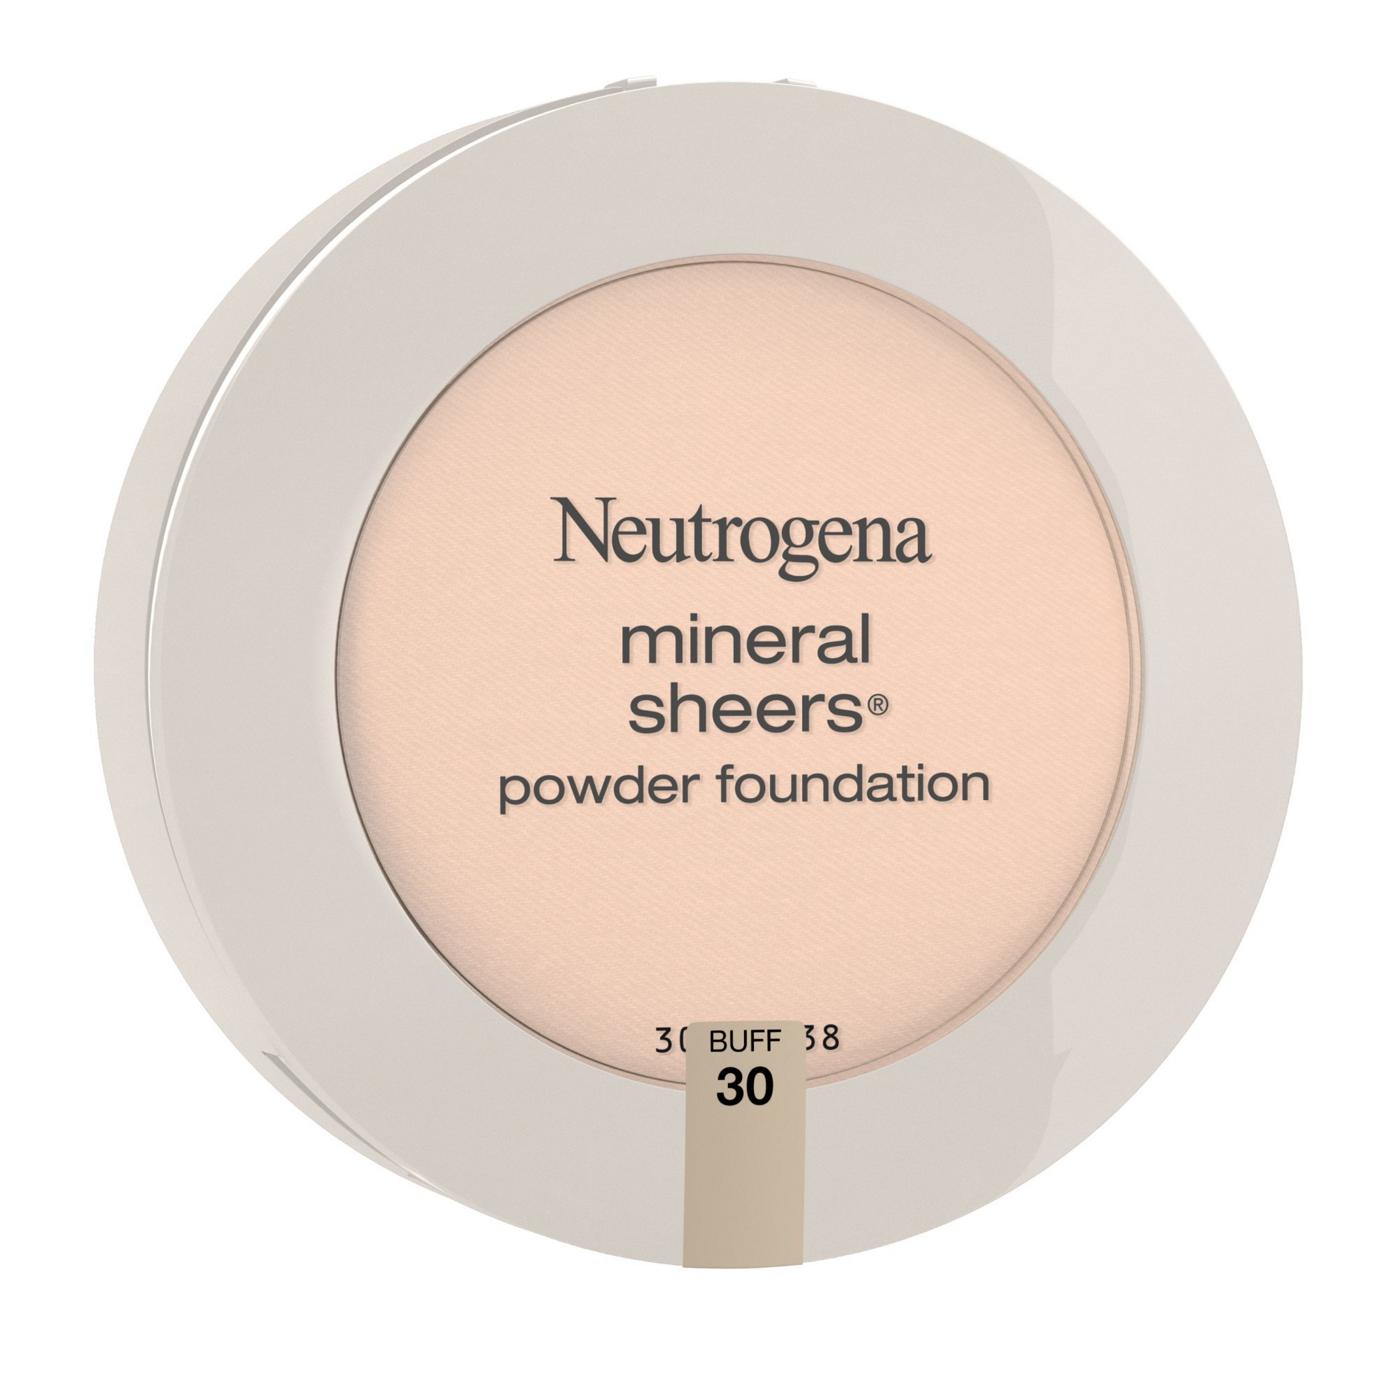 Neutrogena Mineral Sheers Compact Powder Foundation 30 Buff; image 4 of 6